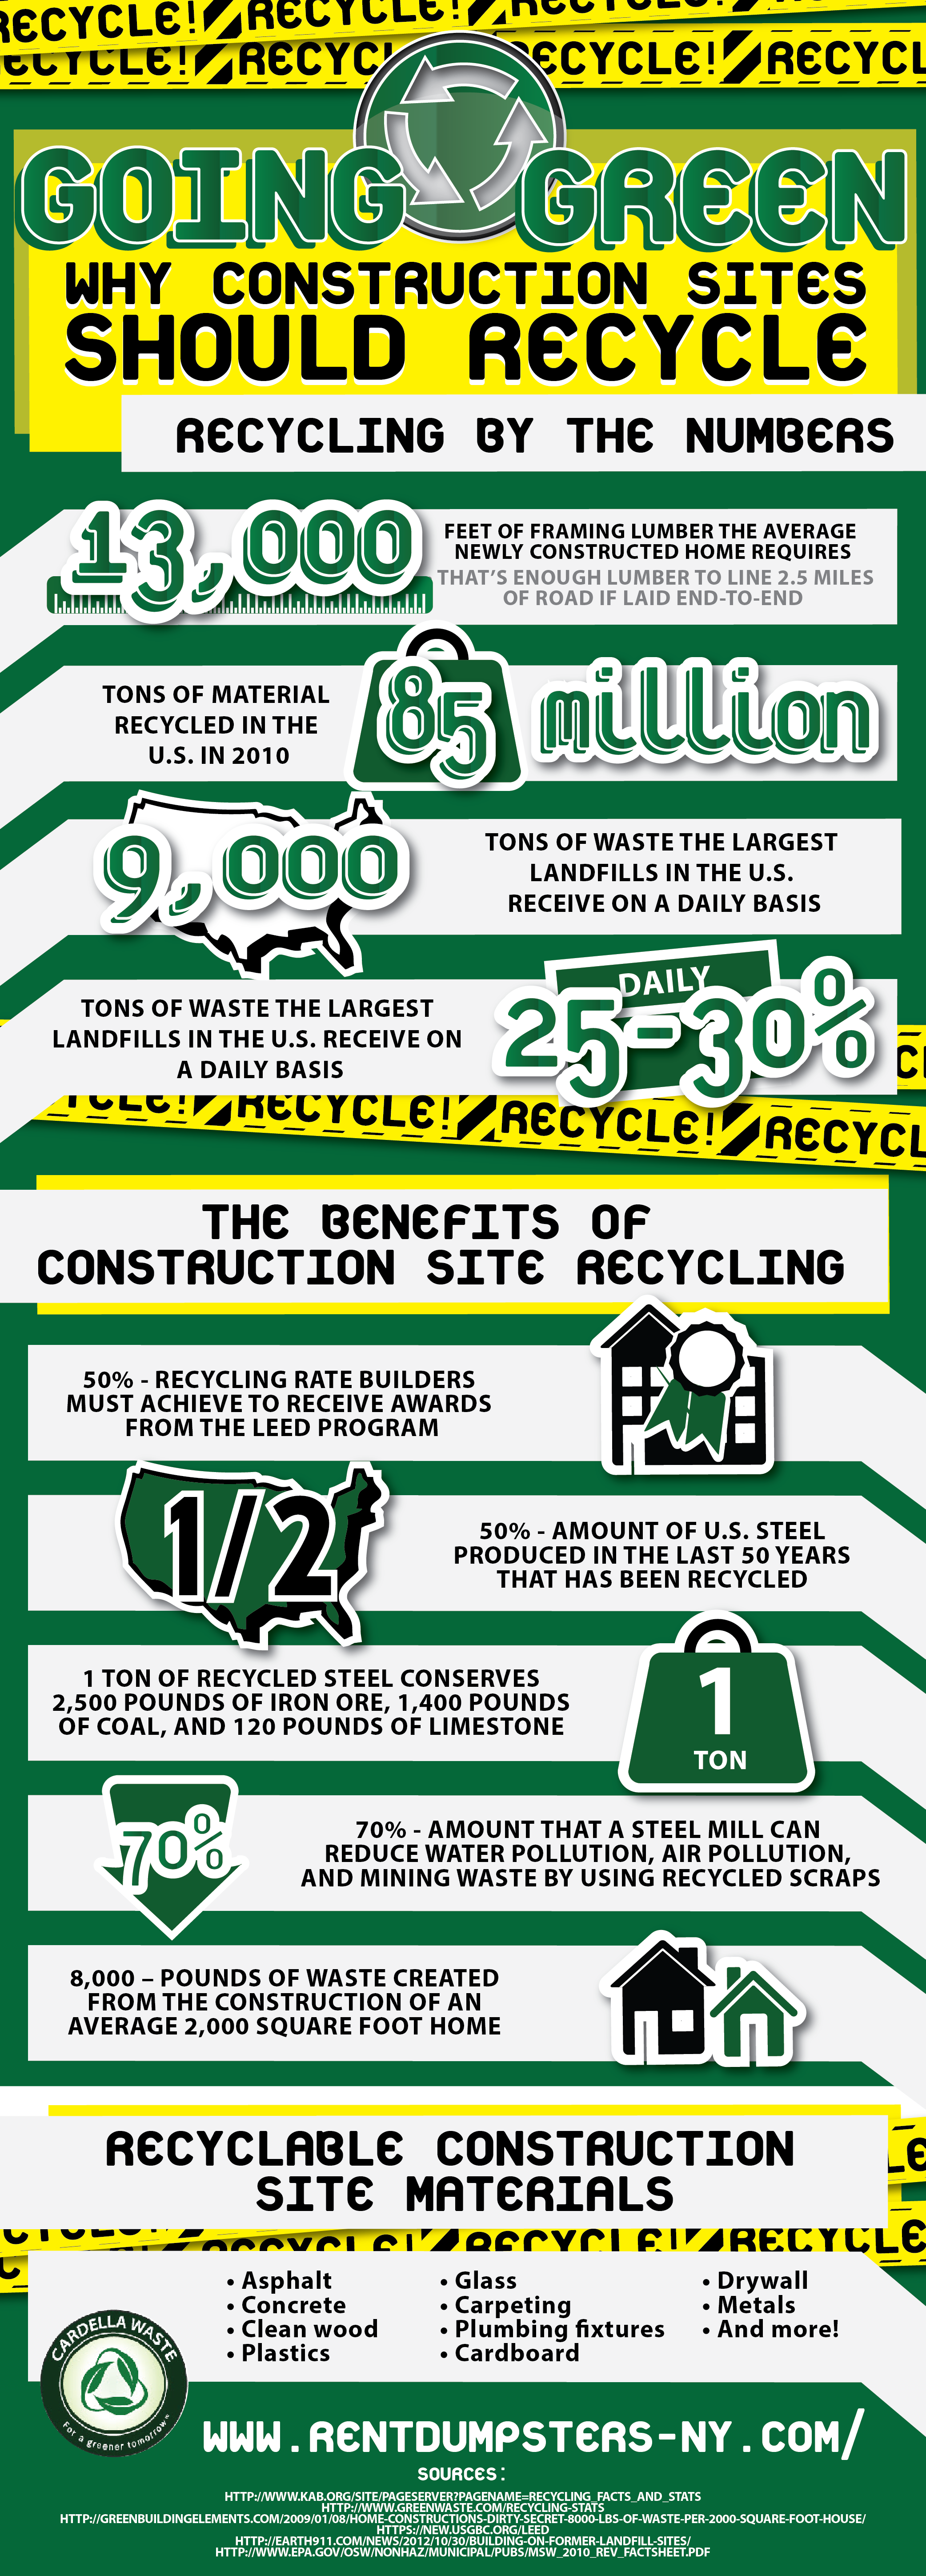 Going Green: Why Construction Sites Should Recycle 